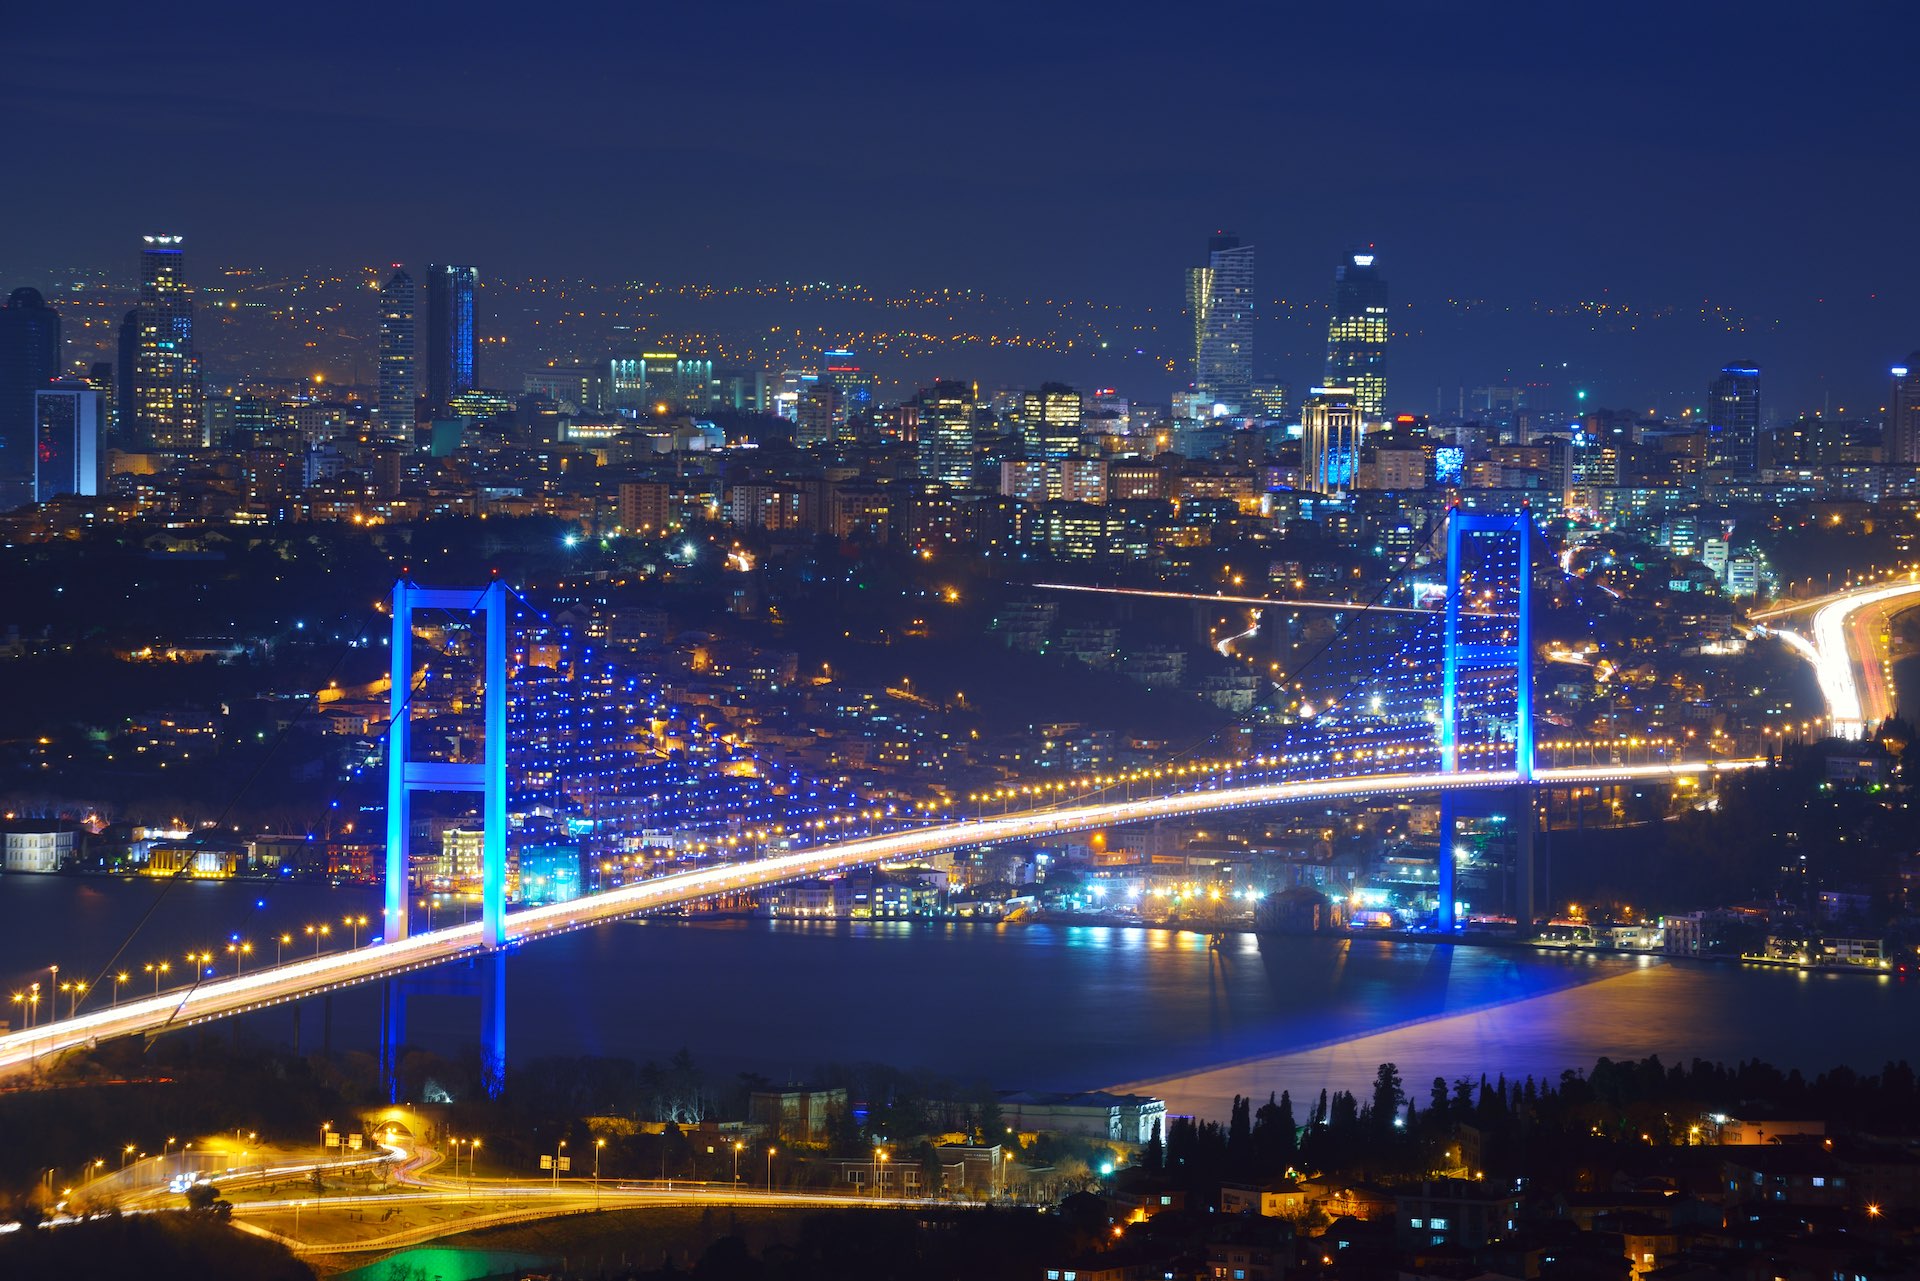 Top real estate investors in Turkey include Iran, Iraq, and Kuwait